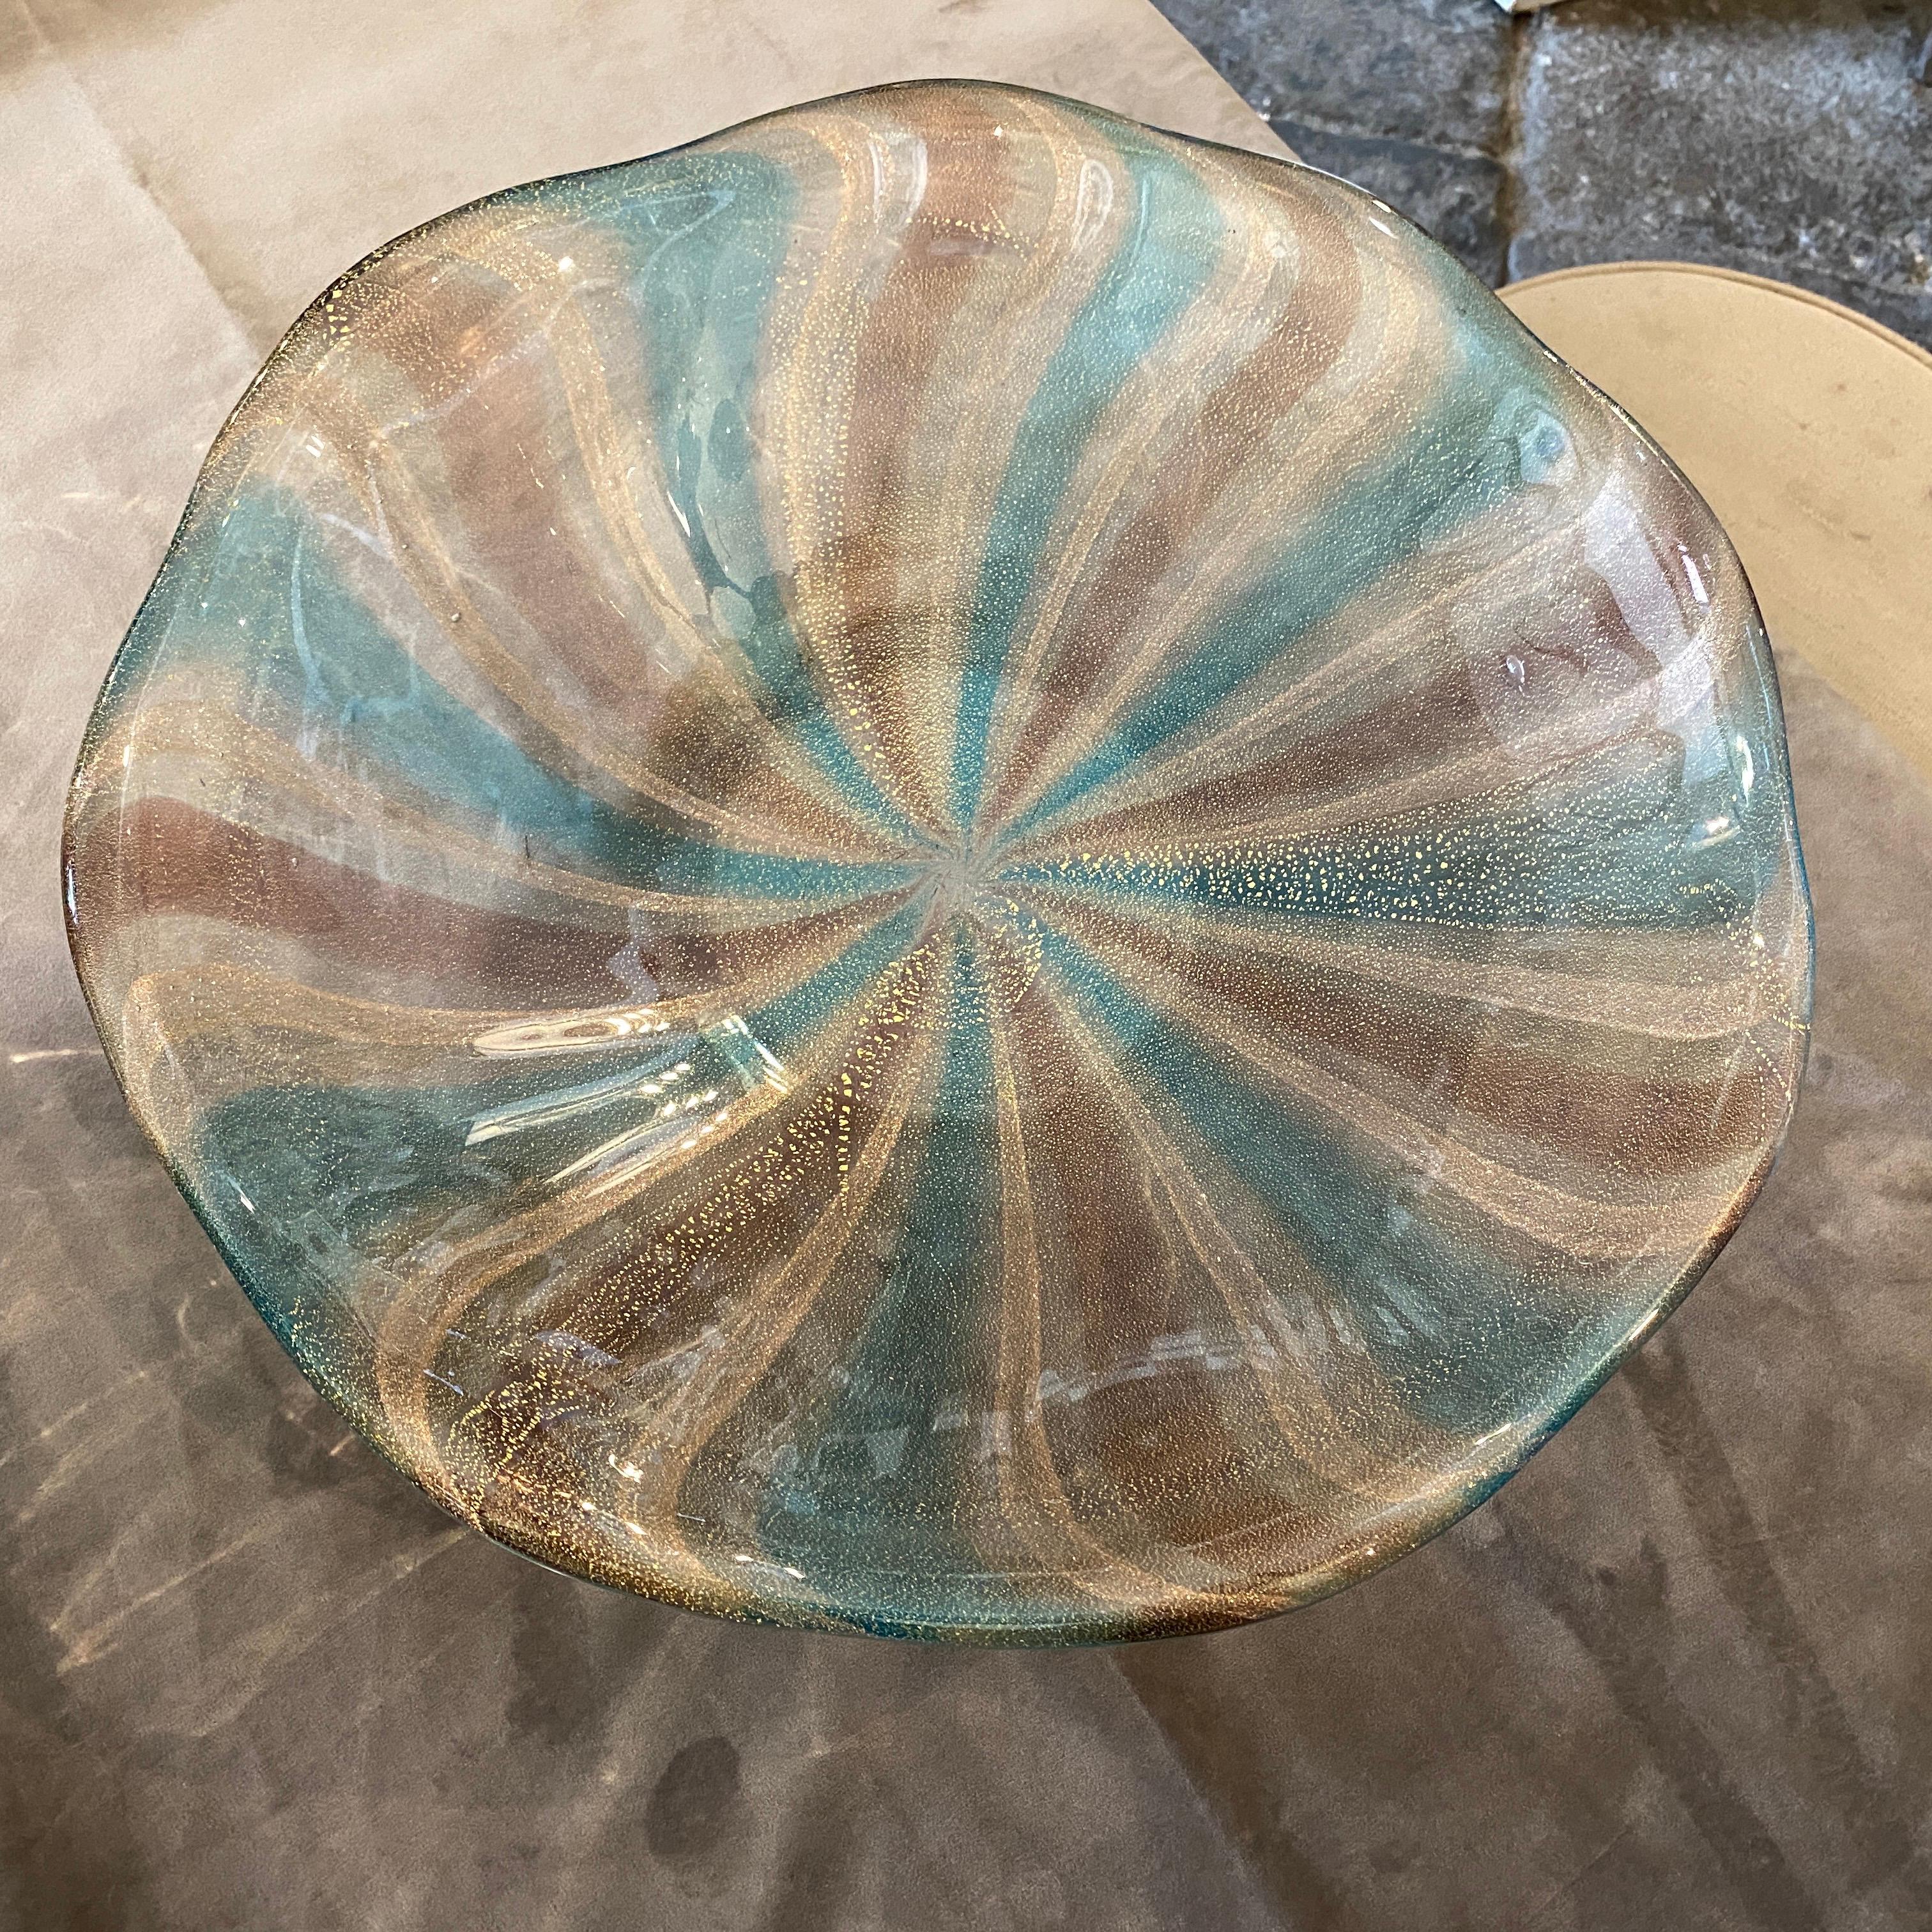 A large murano glass bowl manufactured in Venice in the manner of Fulvio Bianconi, it's in perfect conditions. This Centerpiece is a striking and luxurious decorative piece that showcases the exquisite craftsmanship and artistic flair characteristic